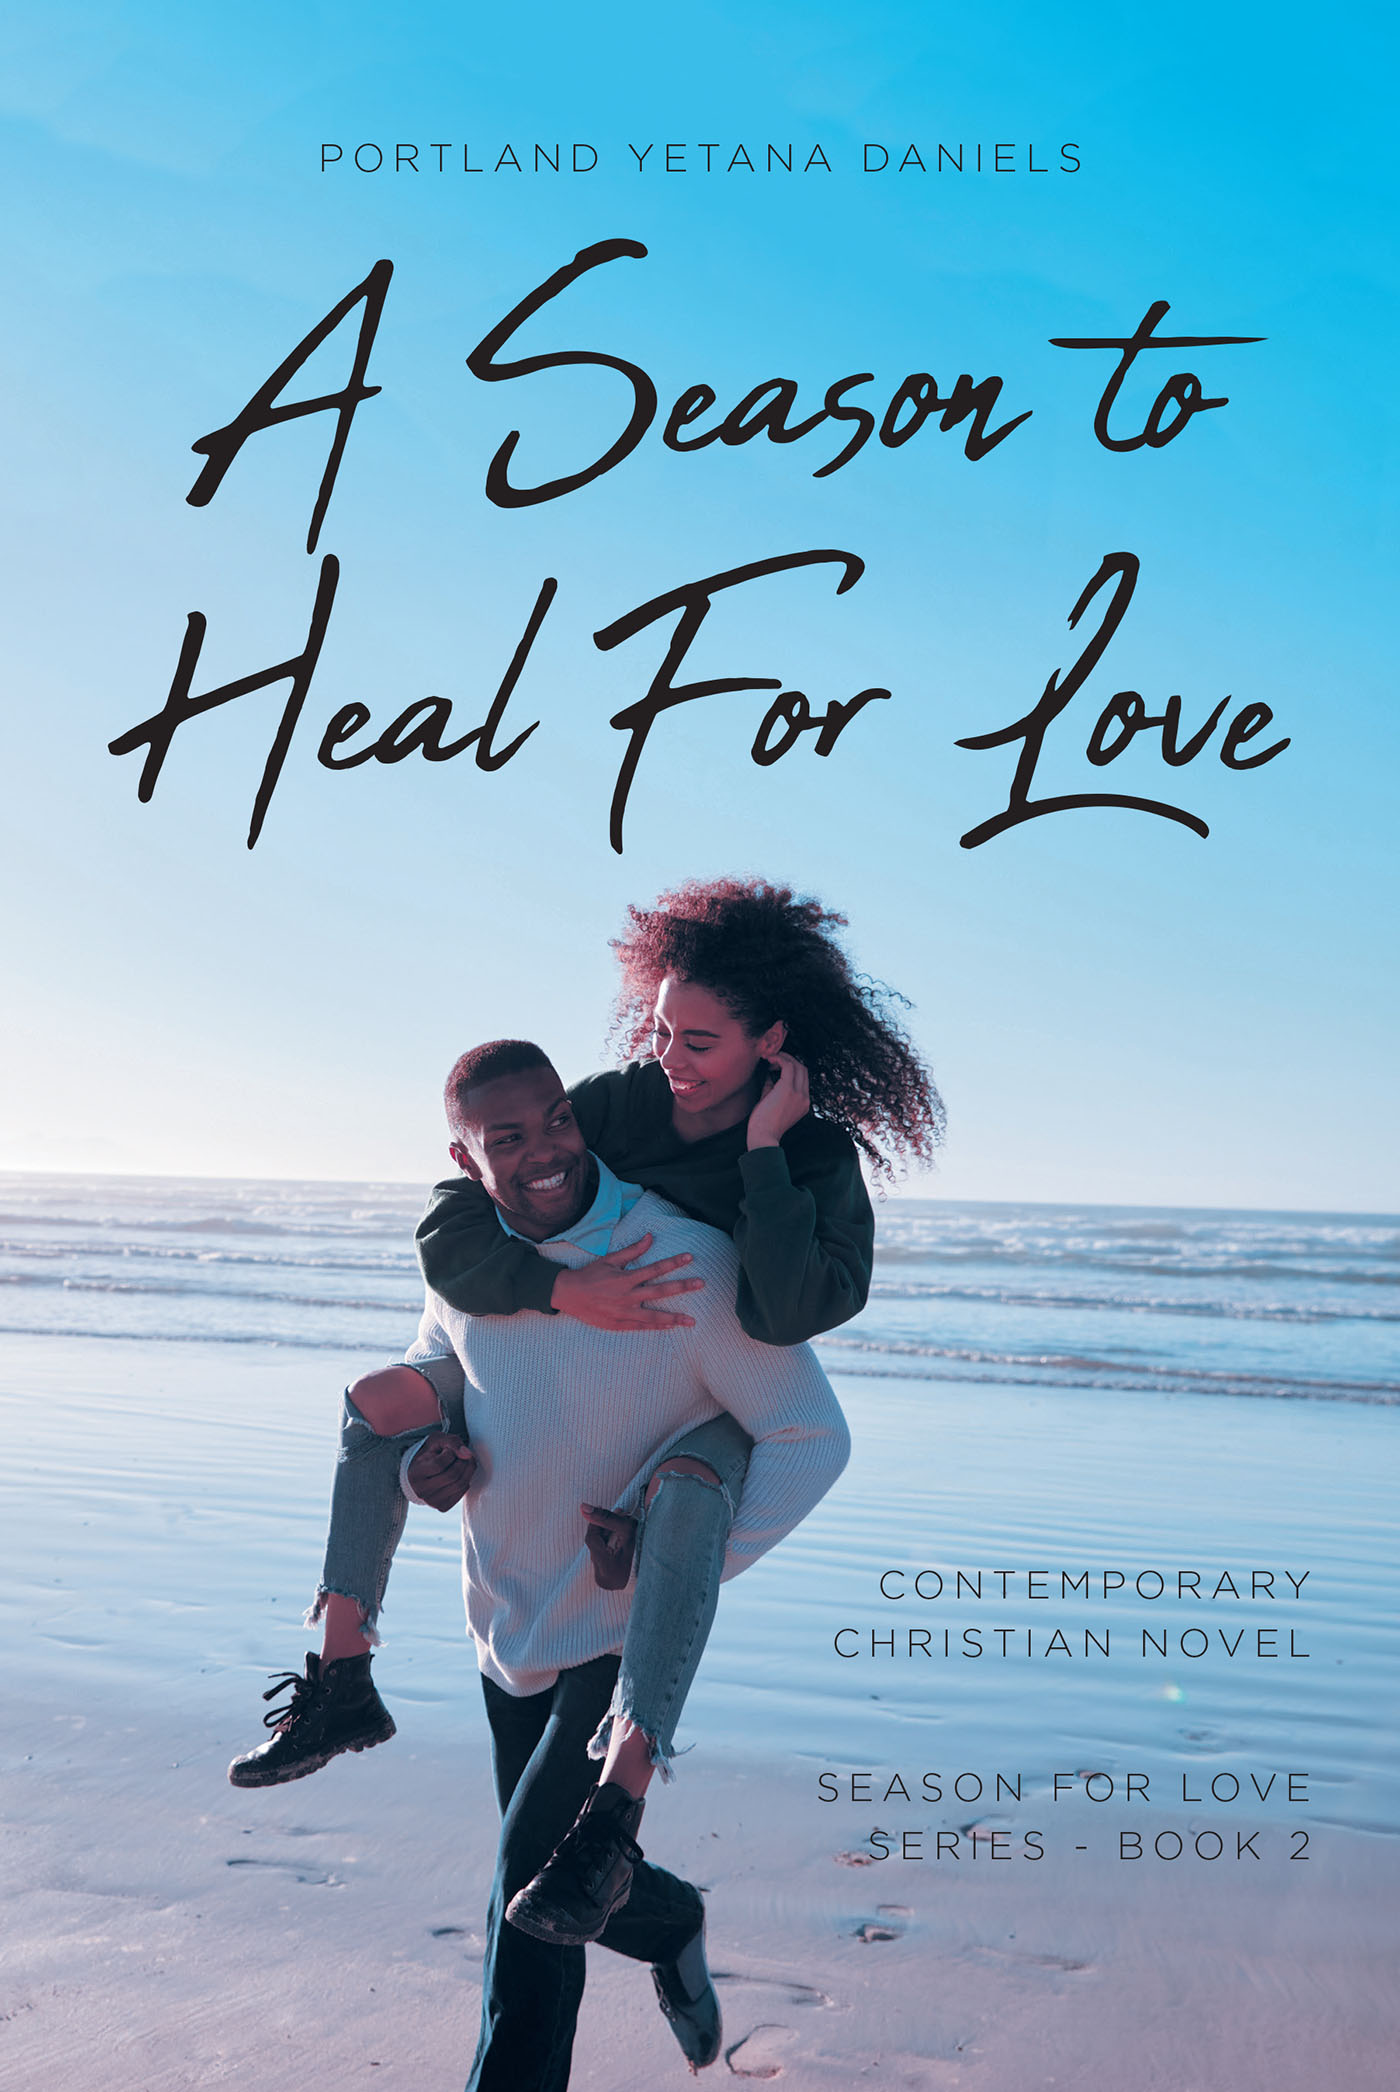 Portland Yetana Daniels’s Newly Released "A Season to Heal for Love" is a Complex Tale of Love, Loss, and Betrayal as a Sudden Inheritance Changes Everything